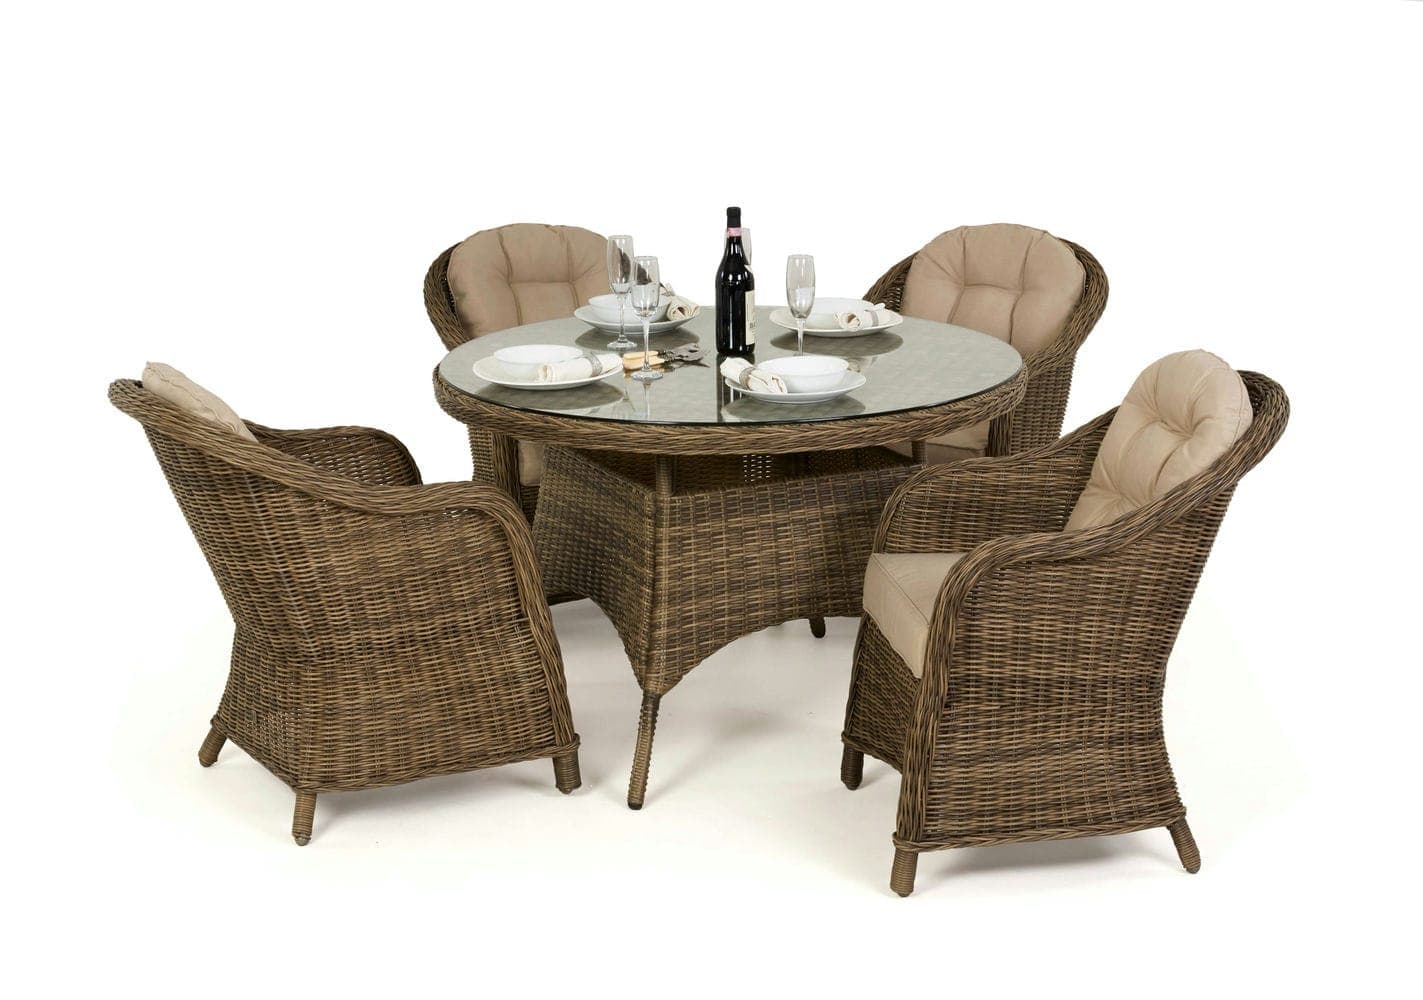 Winchester 4 Seat Round Dining Set with Heritage Chairs - Vookoo Lifestyle